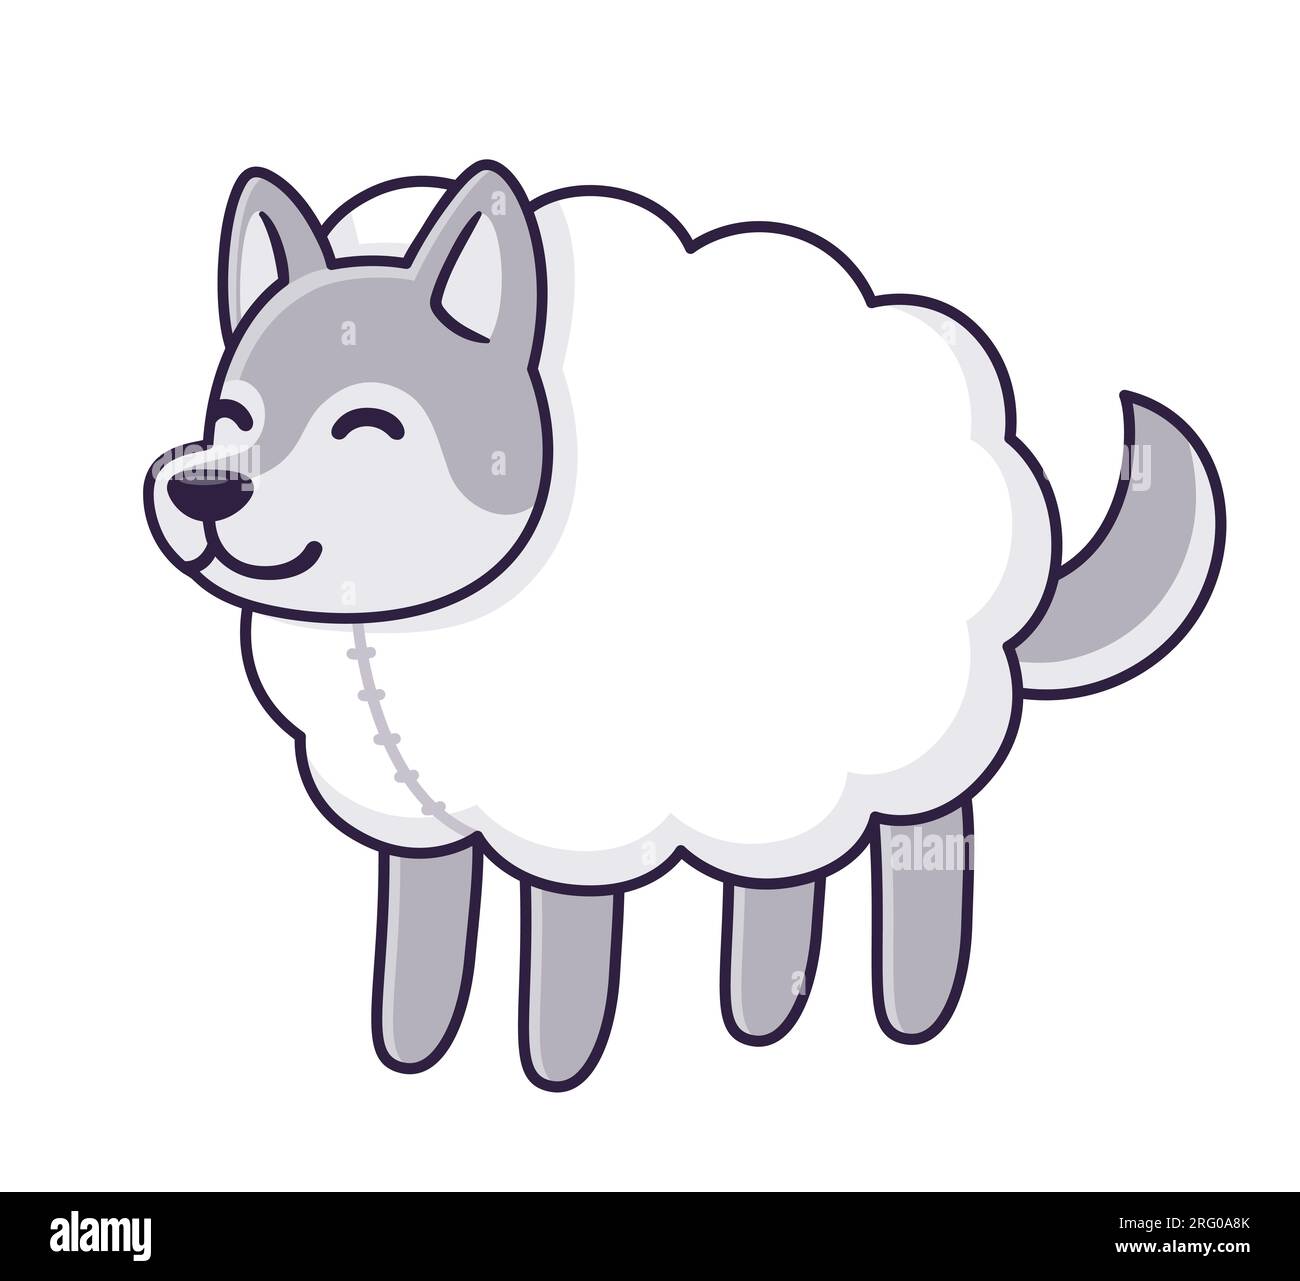 Wolf in sheep's clothing. Cute cartoon wolf wearing sheep costume. Funny vector clip art illustration. Stock Vector